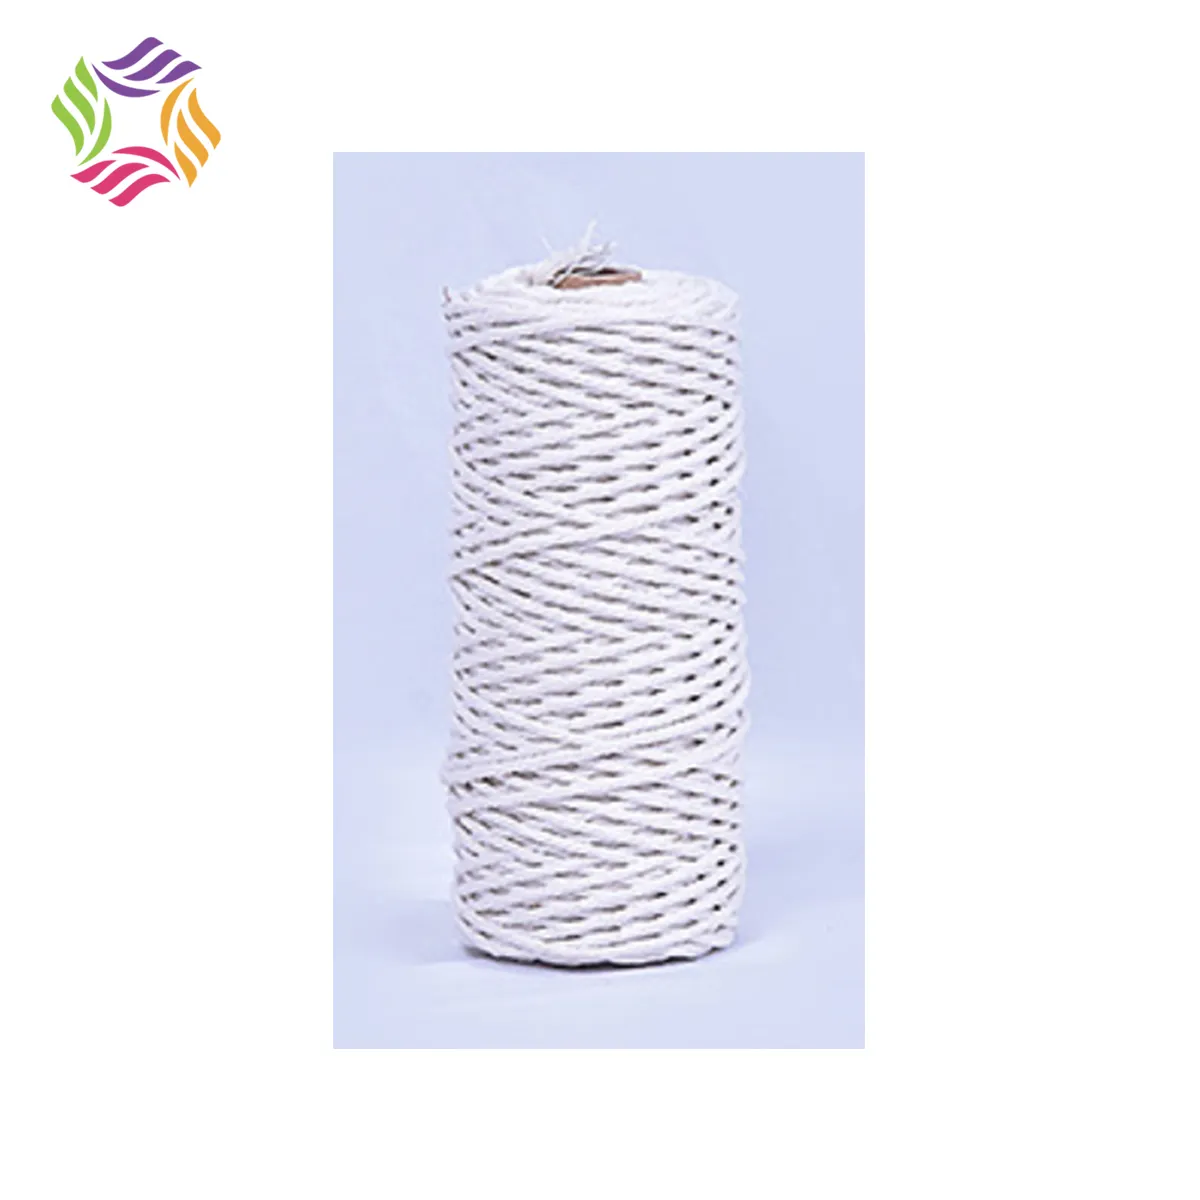 Charmkey factory customize 100 meters macrame cord for Christmas decoration white cotton rope 3mm package high quality cheap